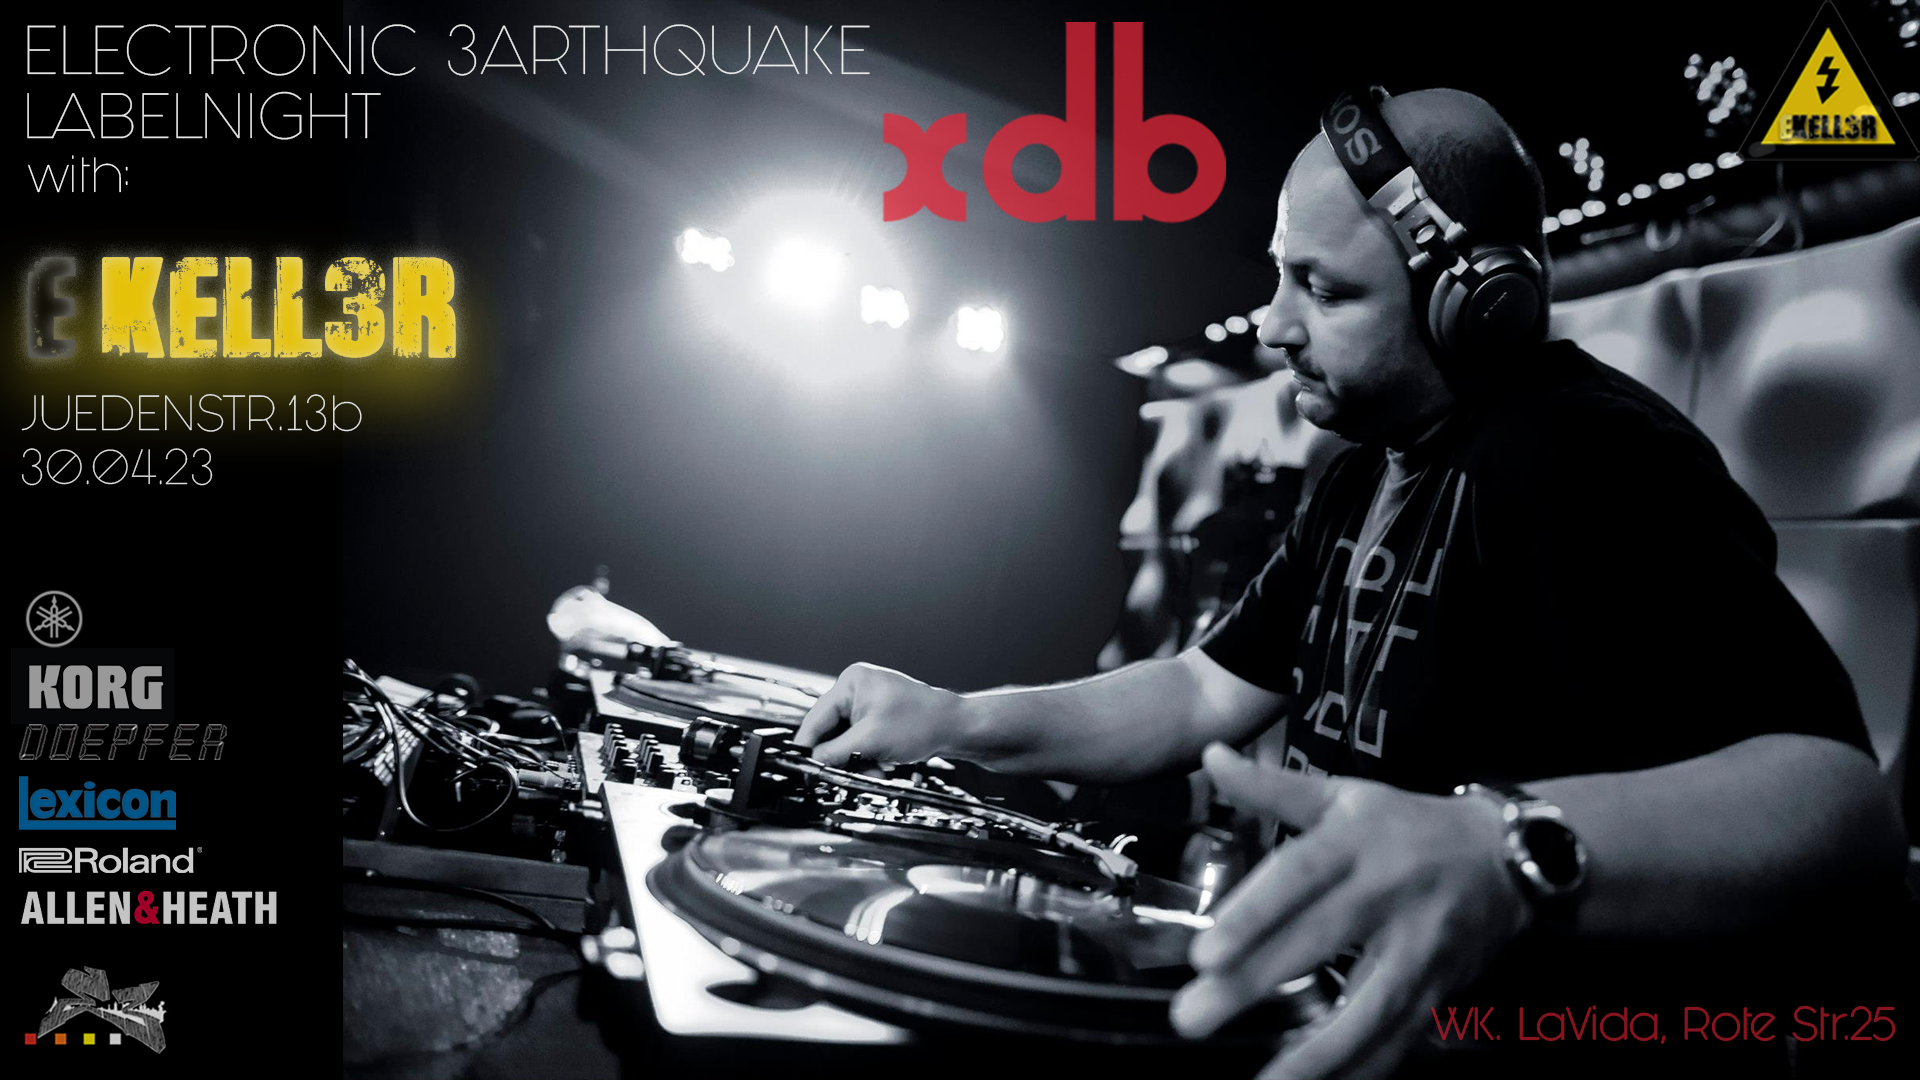 Electronic Earthquake Labelnight with XDB - Página frontal